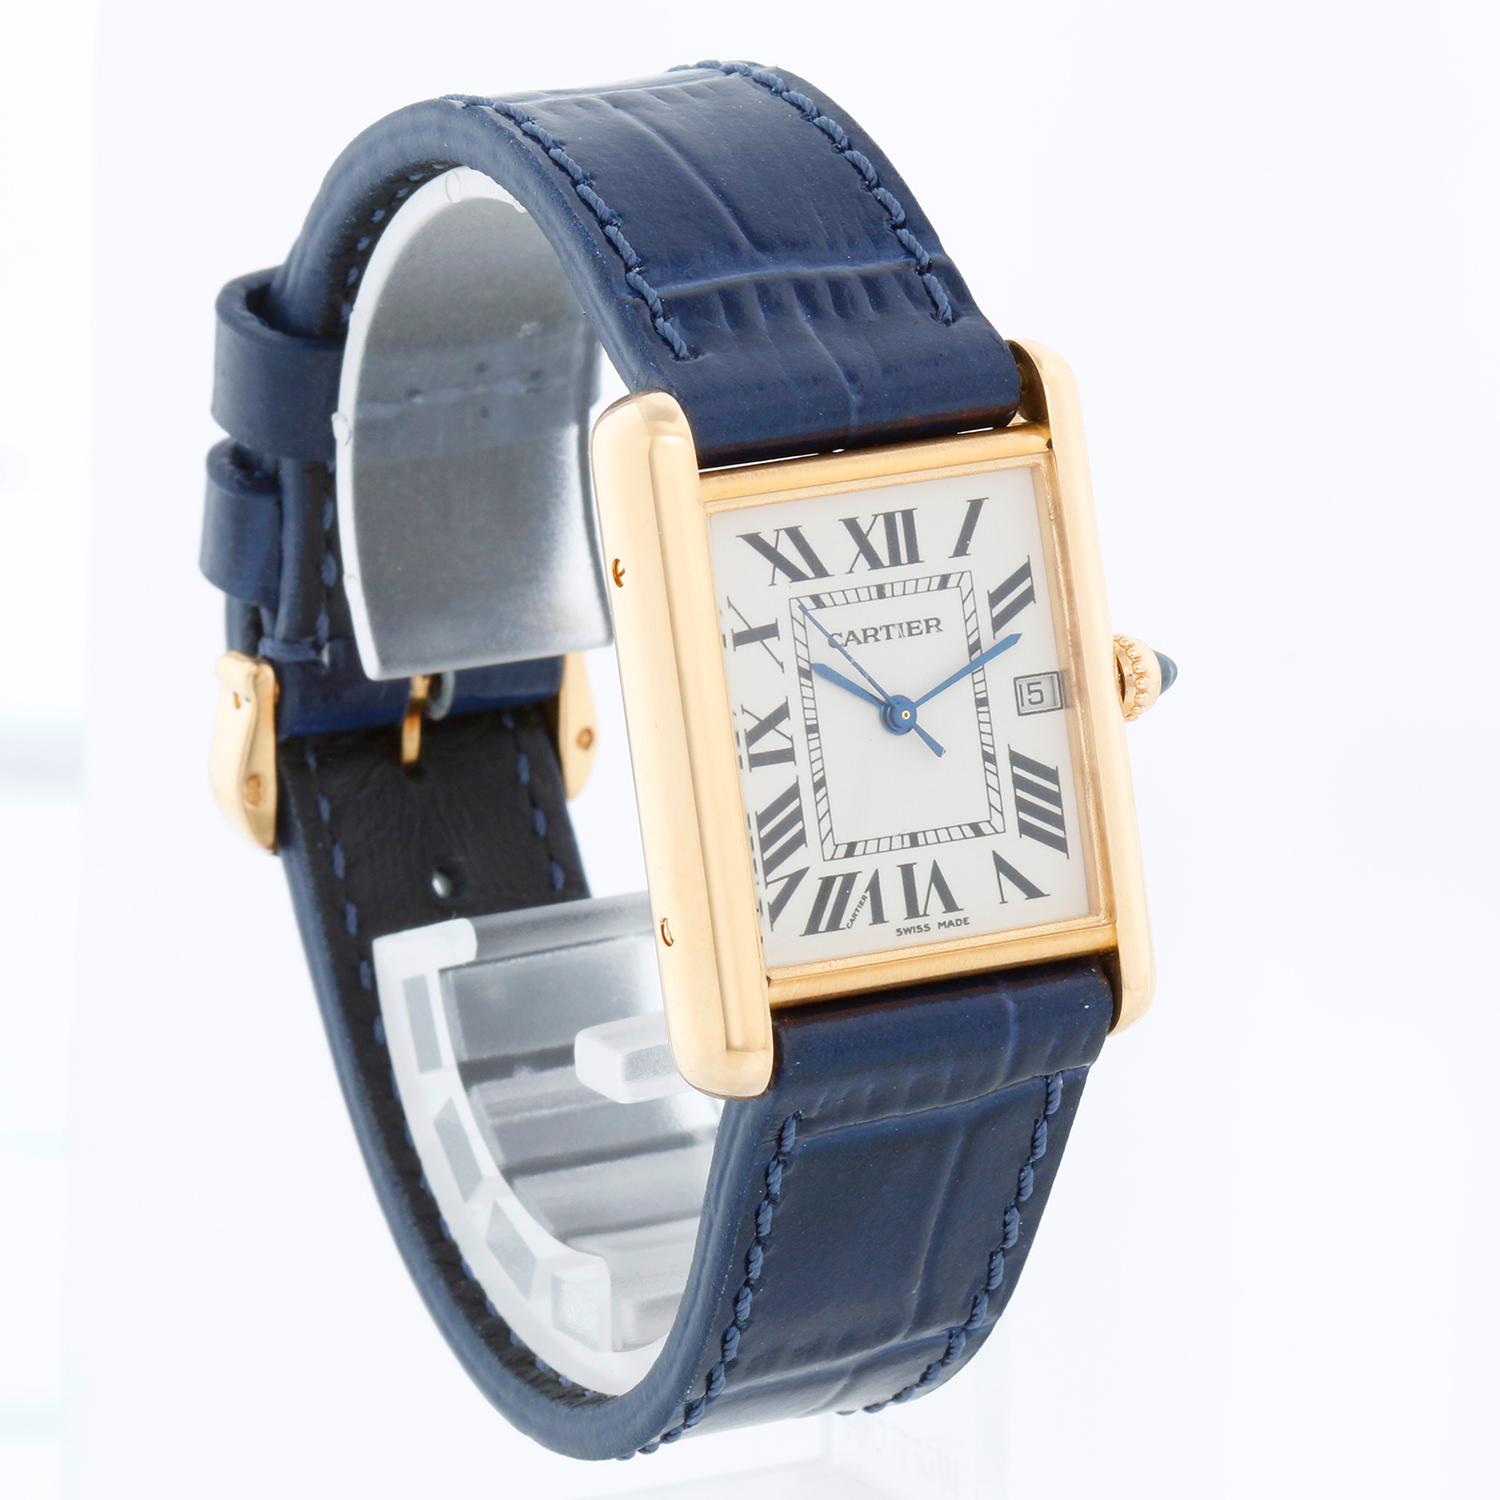 Cartier Tank Louis 18K Yellow Unisex Gold Watch W1529756 2441 - Quartz. 18K Yellow Gold ( 26 x 34 mm ). Flat Ivory dial with Roman numerals; date at 3 o'clock. Blue Strap with Cartier tang gold buckle. Pre-owned with custom box.